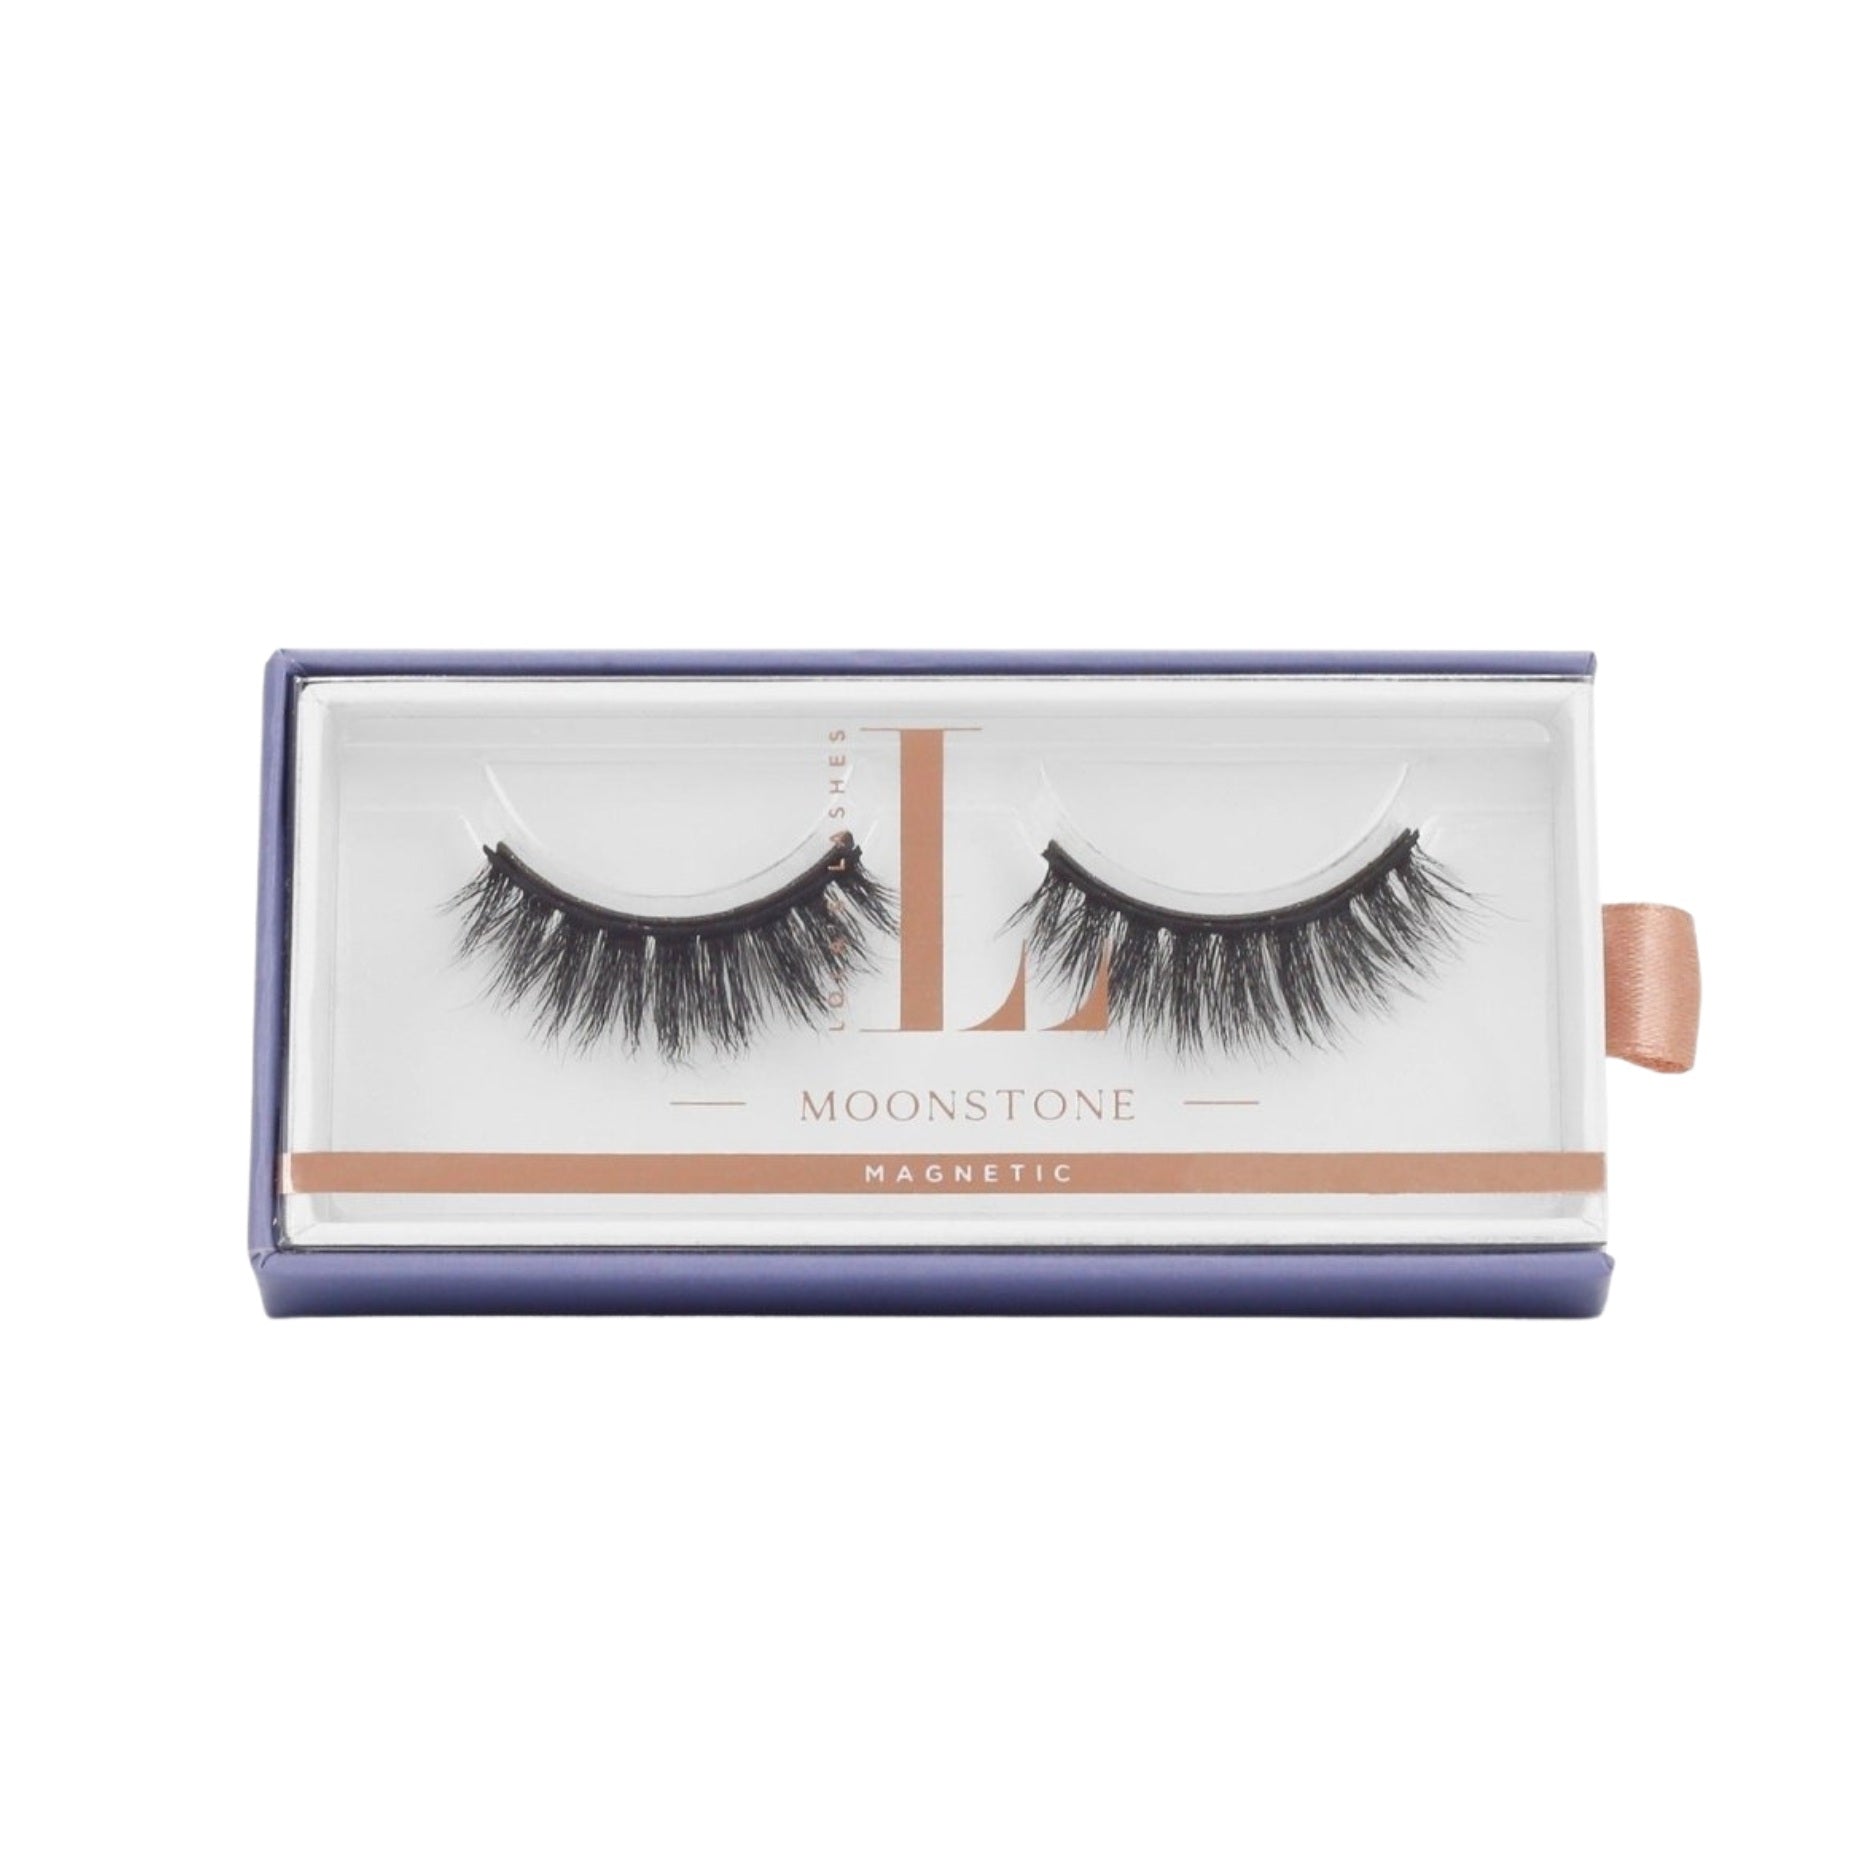 Moonstone Magnetic Lashes